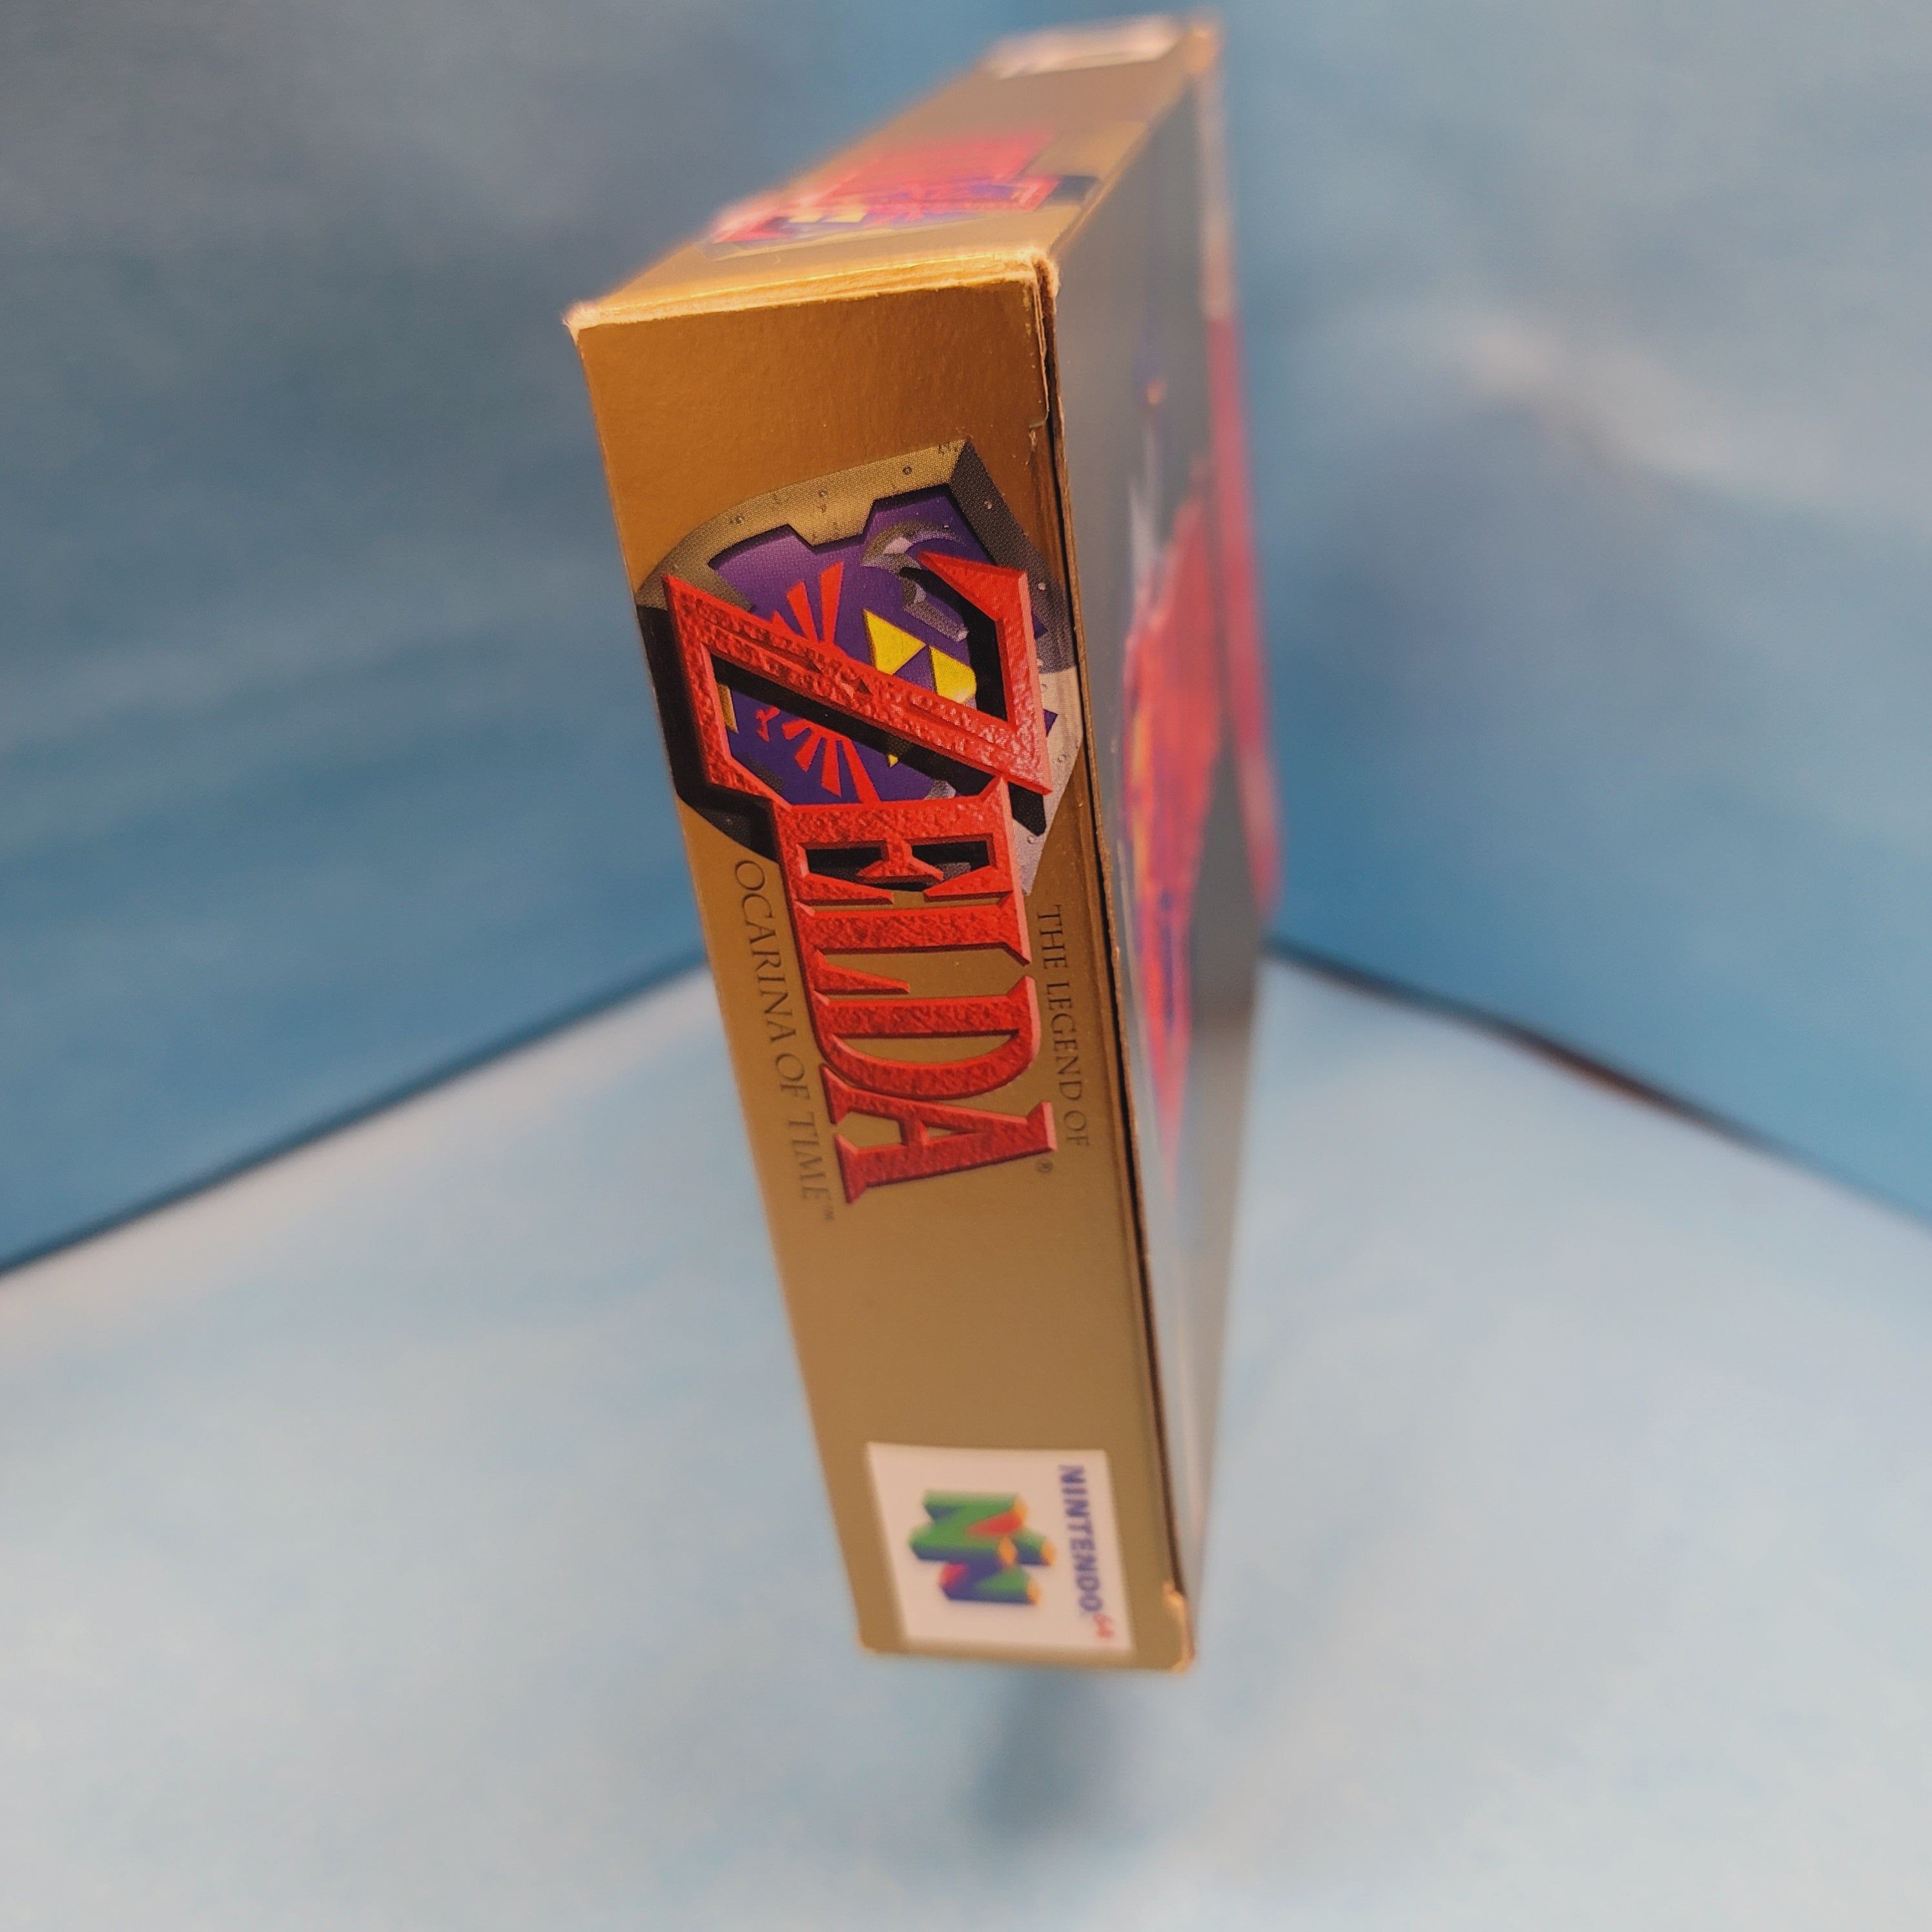 N64 - The Legend of Zelda Ocarina of Time (Complete in Box / A / With Manual)